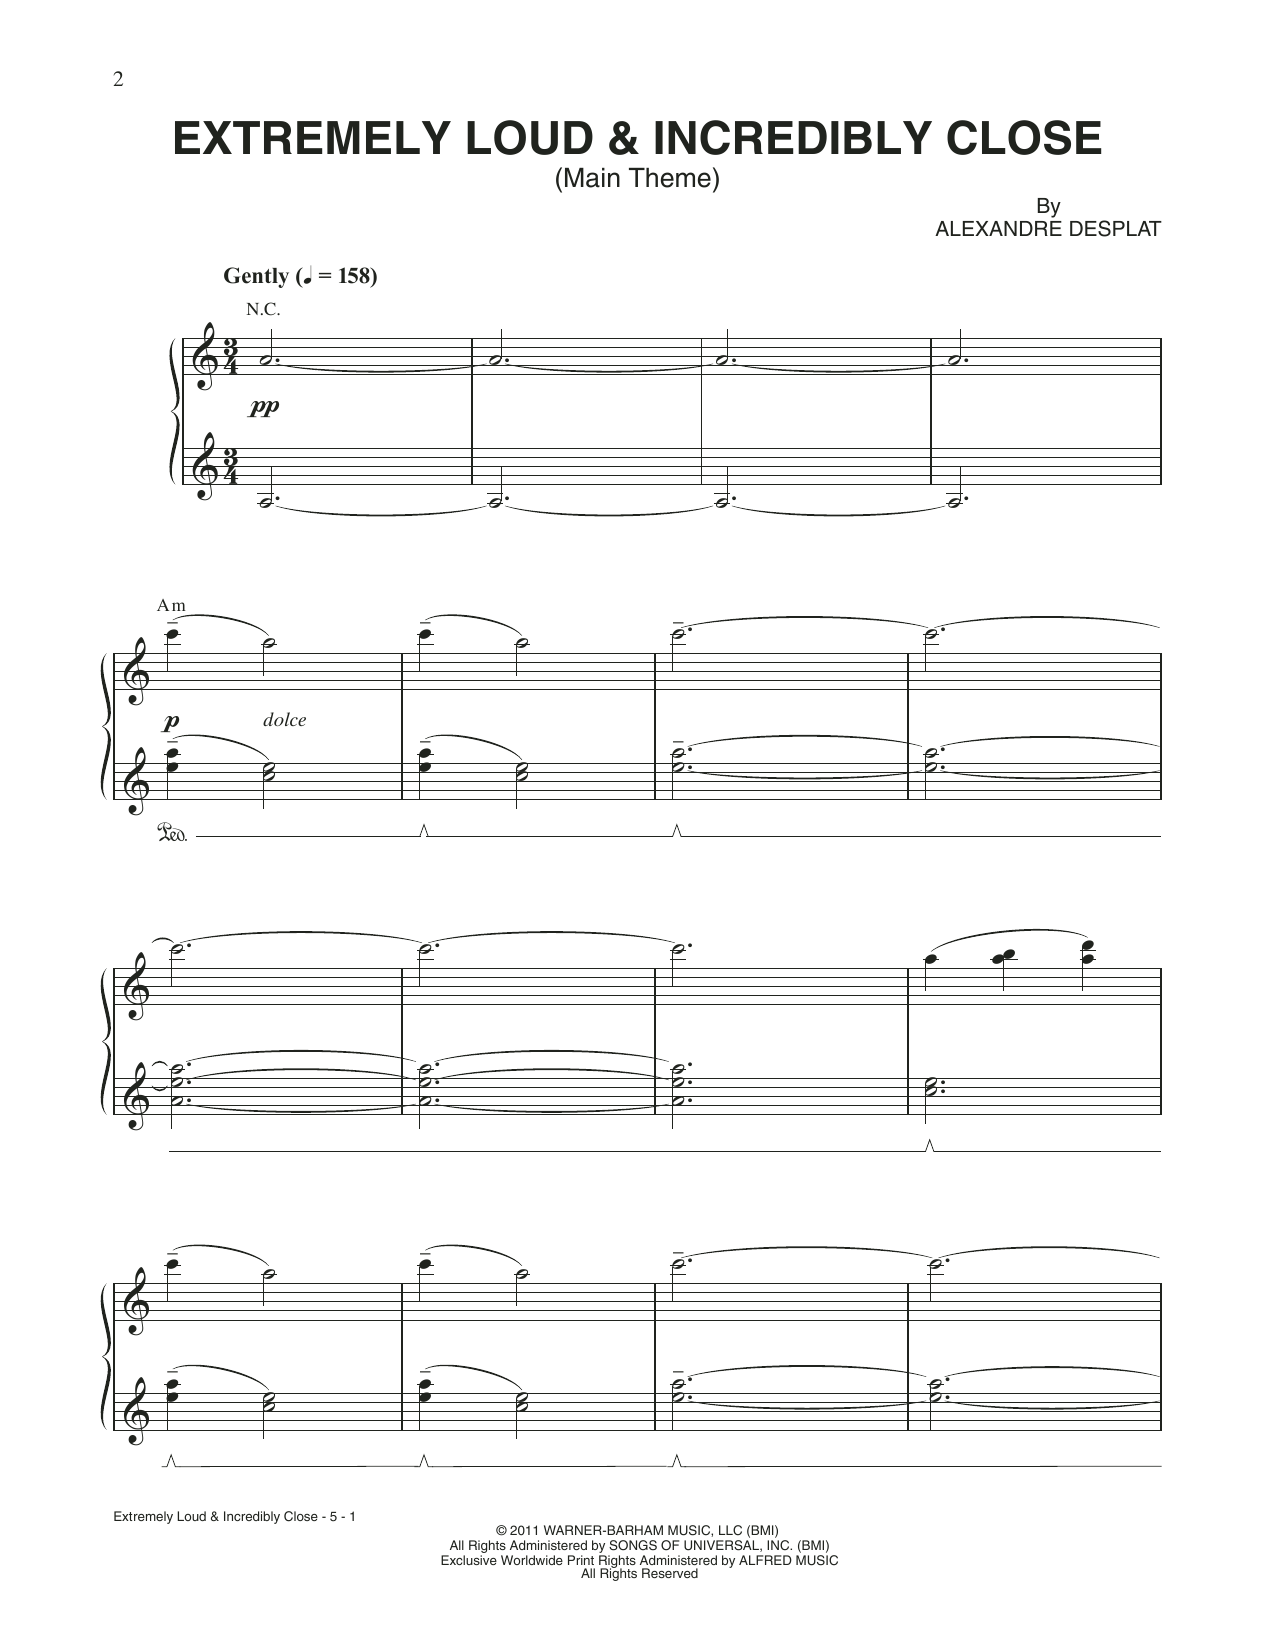 Download Alexandre Michel Desplat Extremely Loud & Incredibly Close Sheet Music